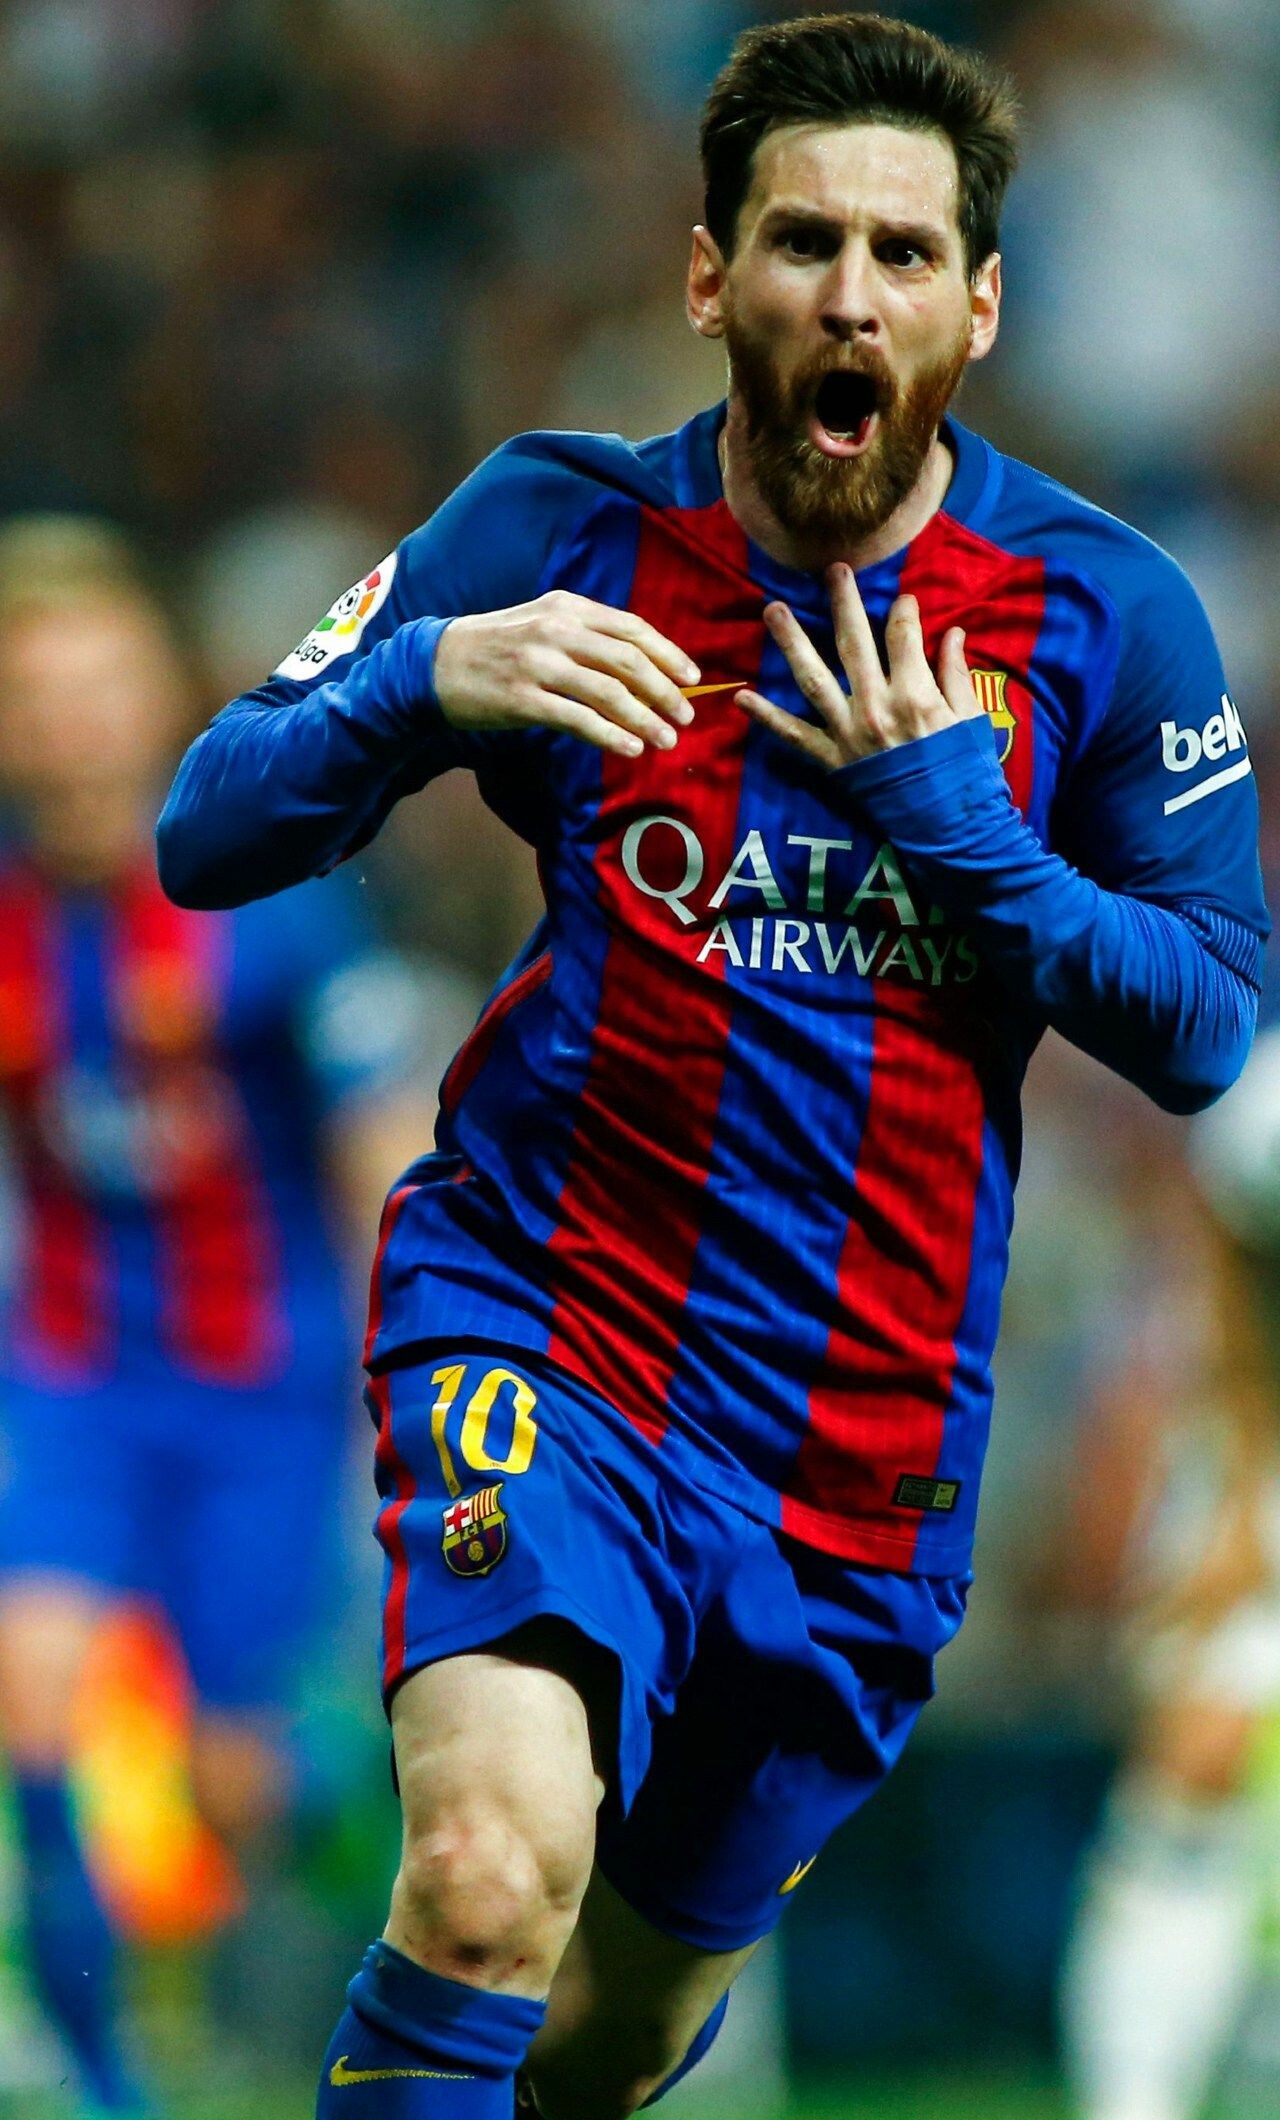 Lionel Messi: The first player to win the Ballons d'Or four times, La Liga, Barcelona. 1280x2120 HD Wallpaper.